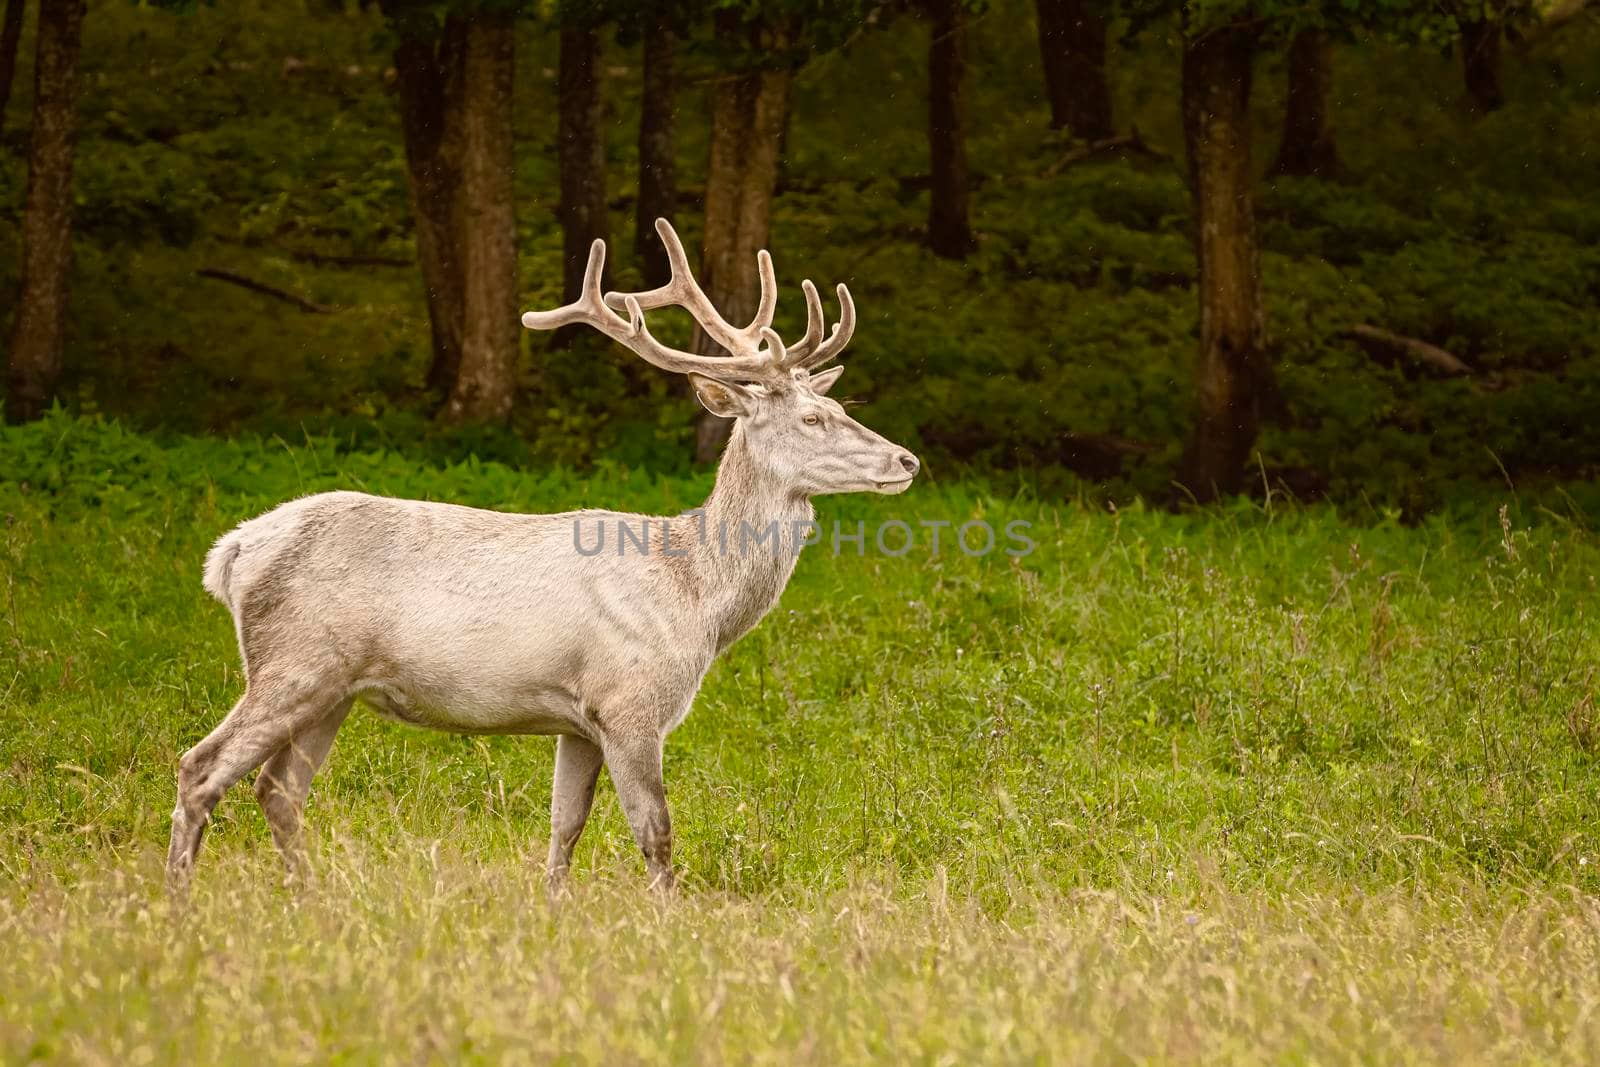 White deer at the green lawn near the forest